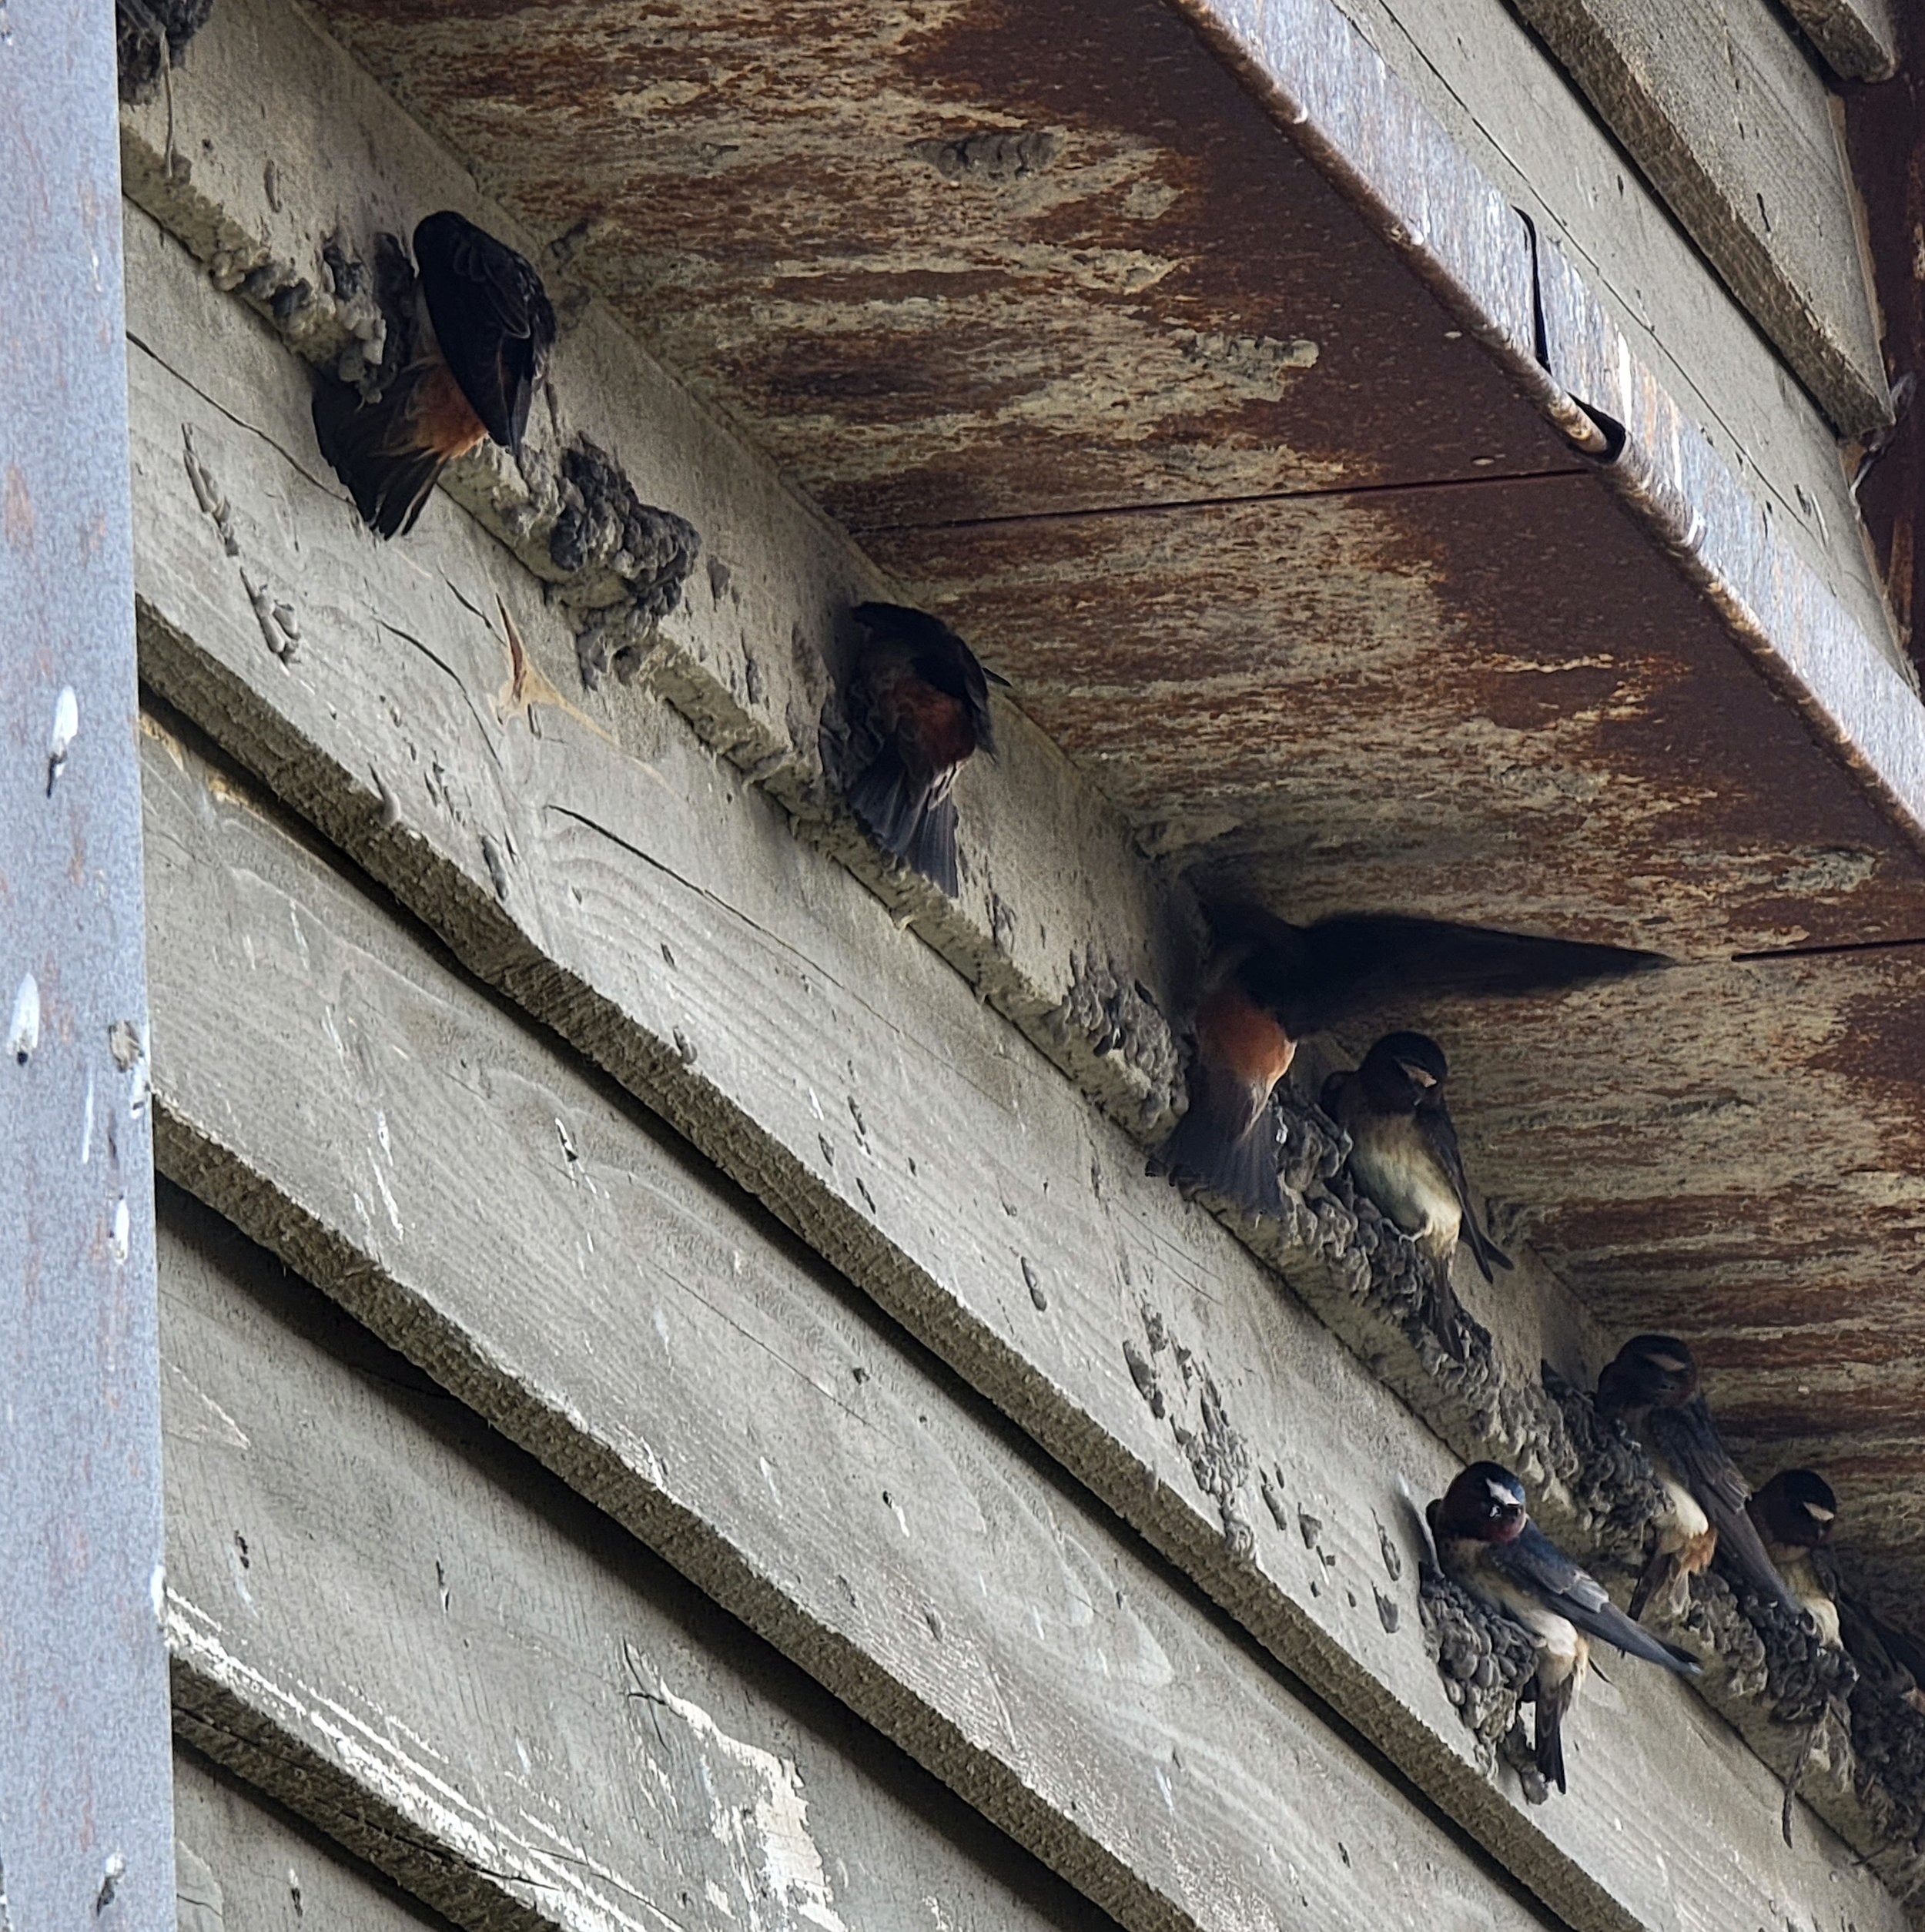 There was just a huge Cliff Swallow colony nesting on the visitor center building, covering it with crap.